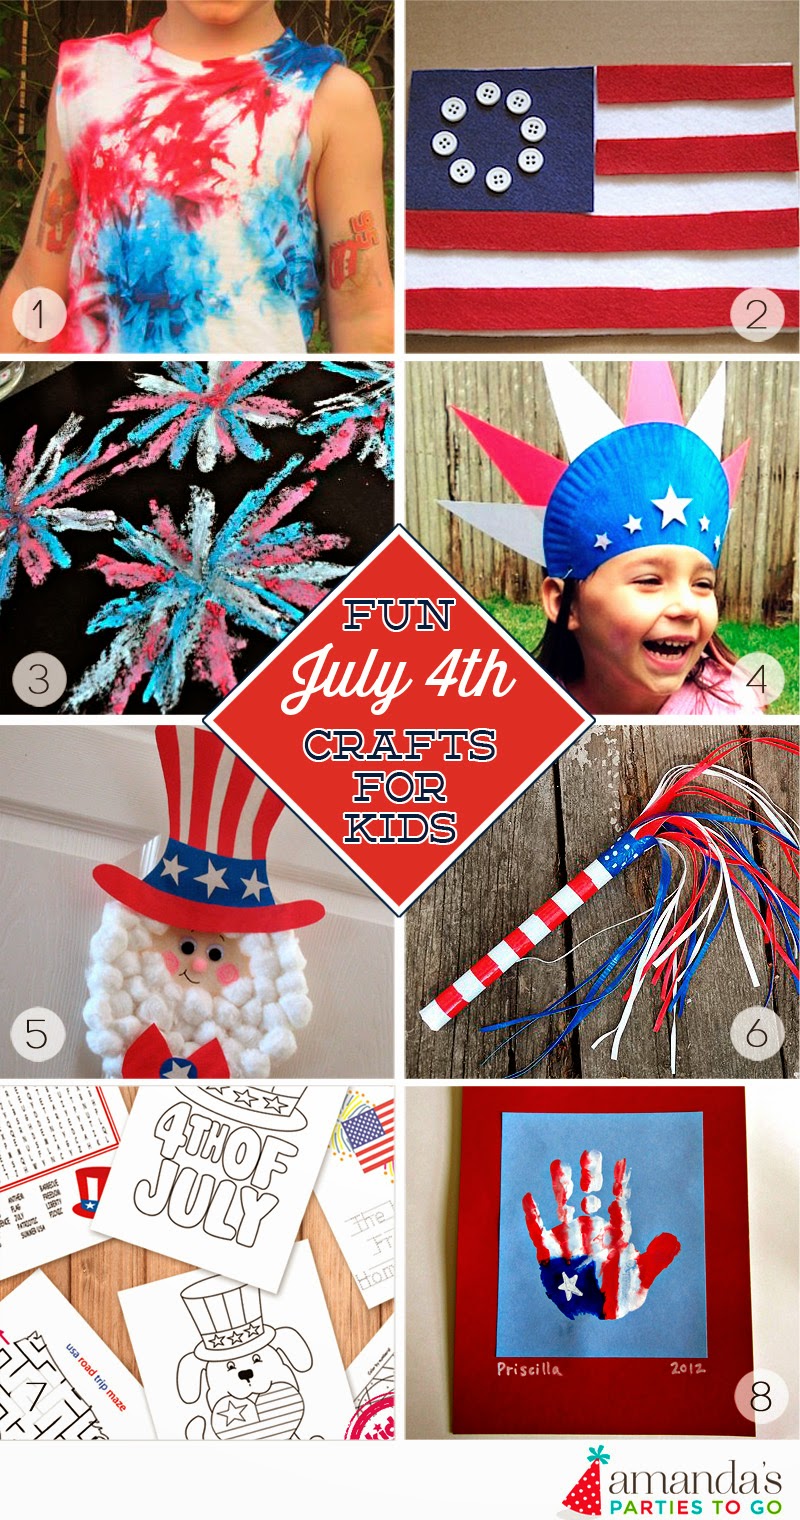 Amandas Parties To Go July 4th Activities For Kids